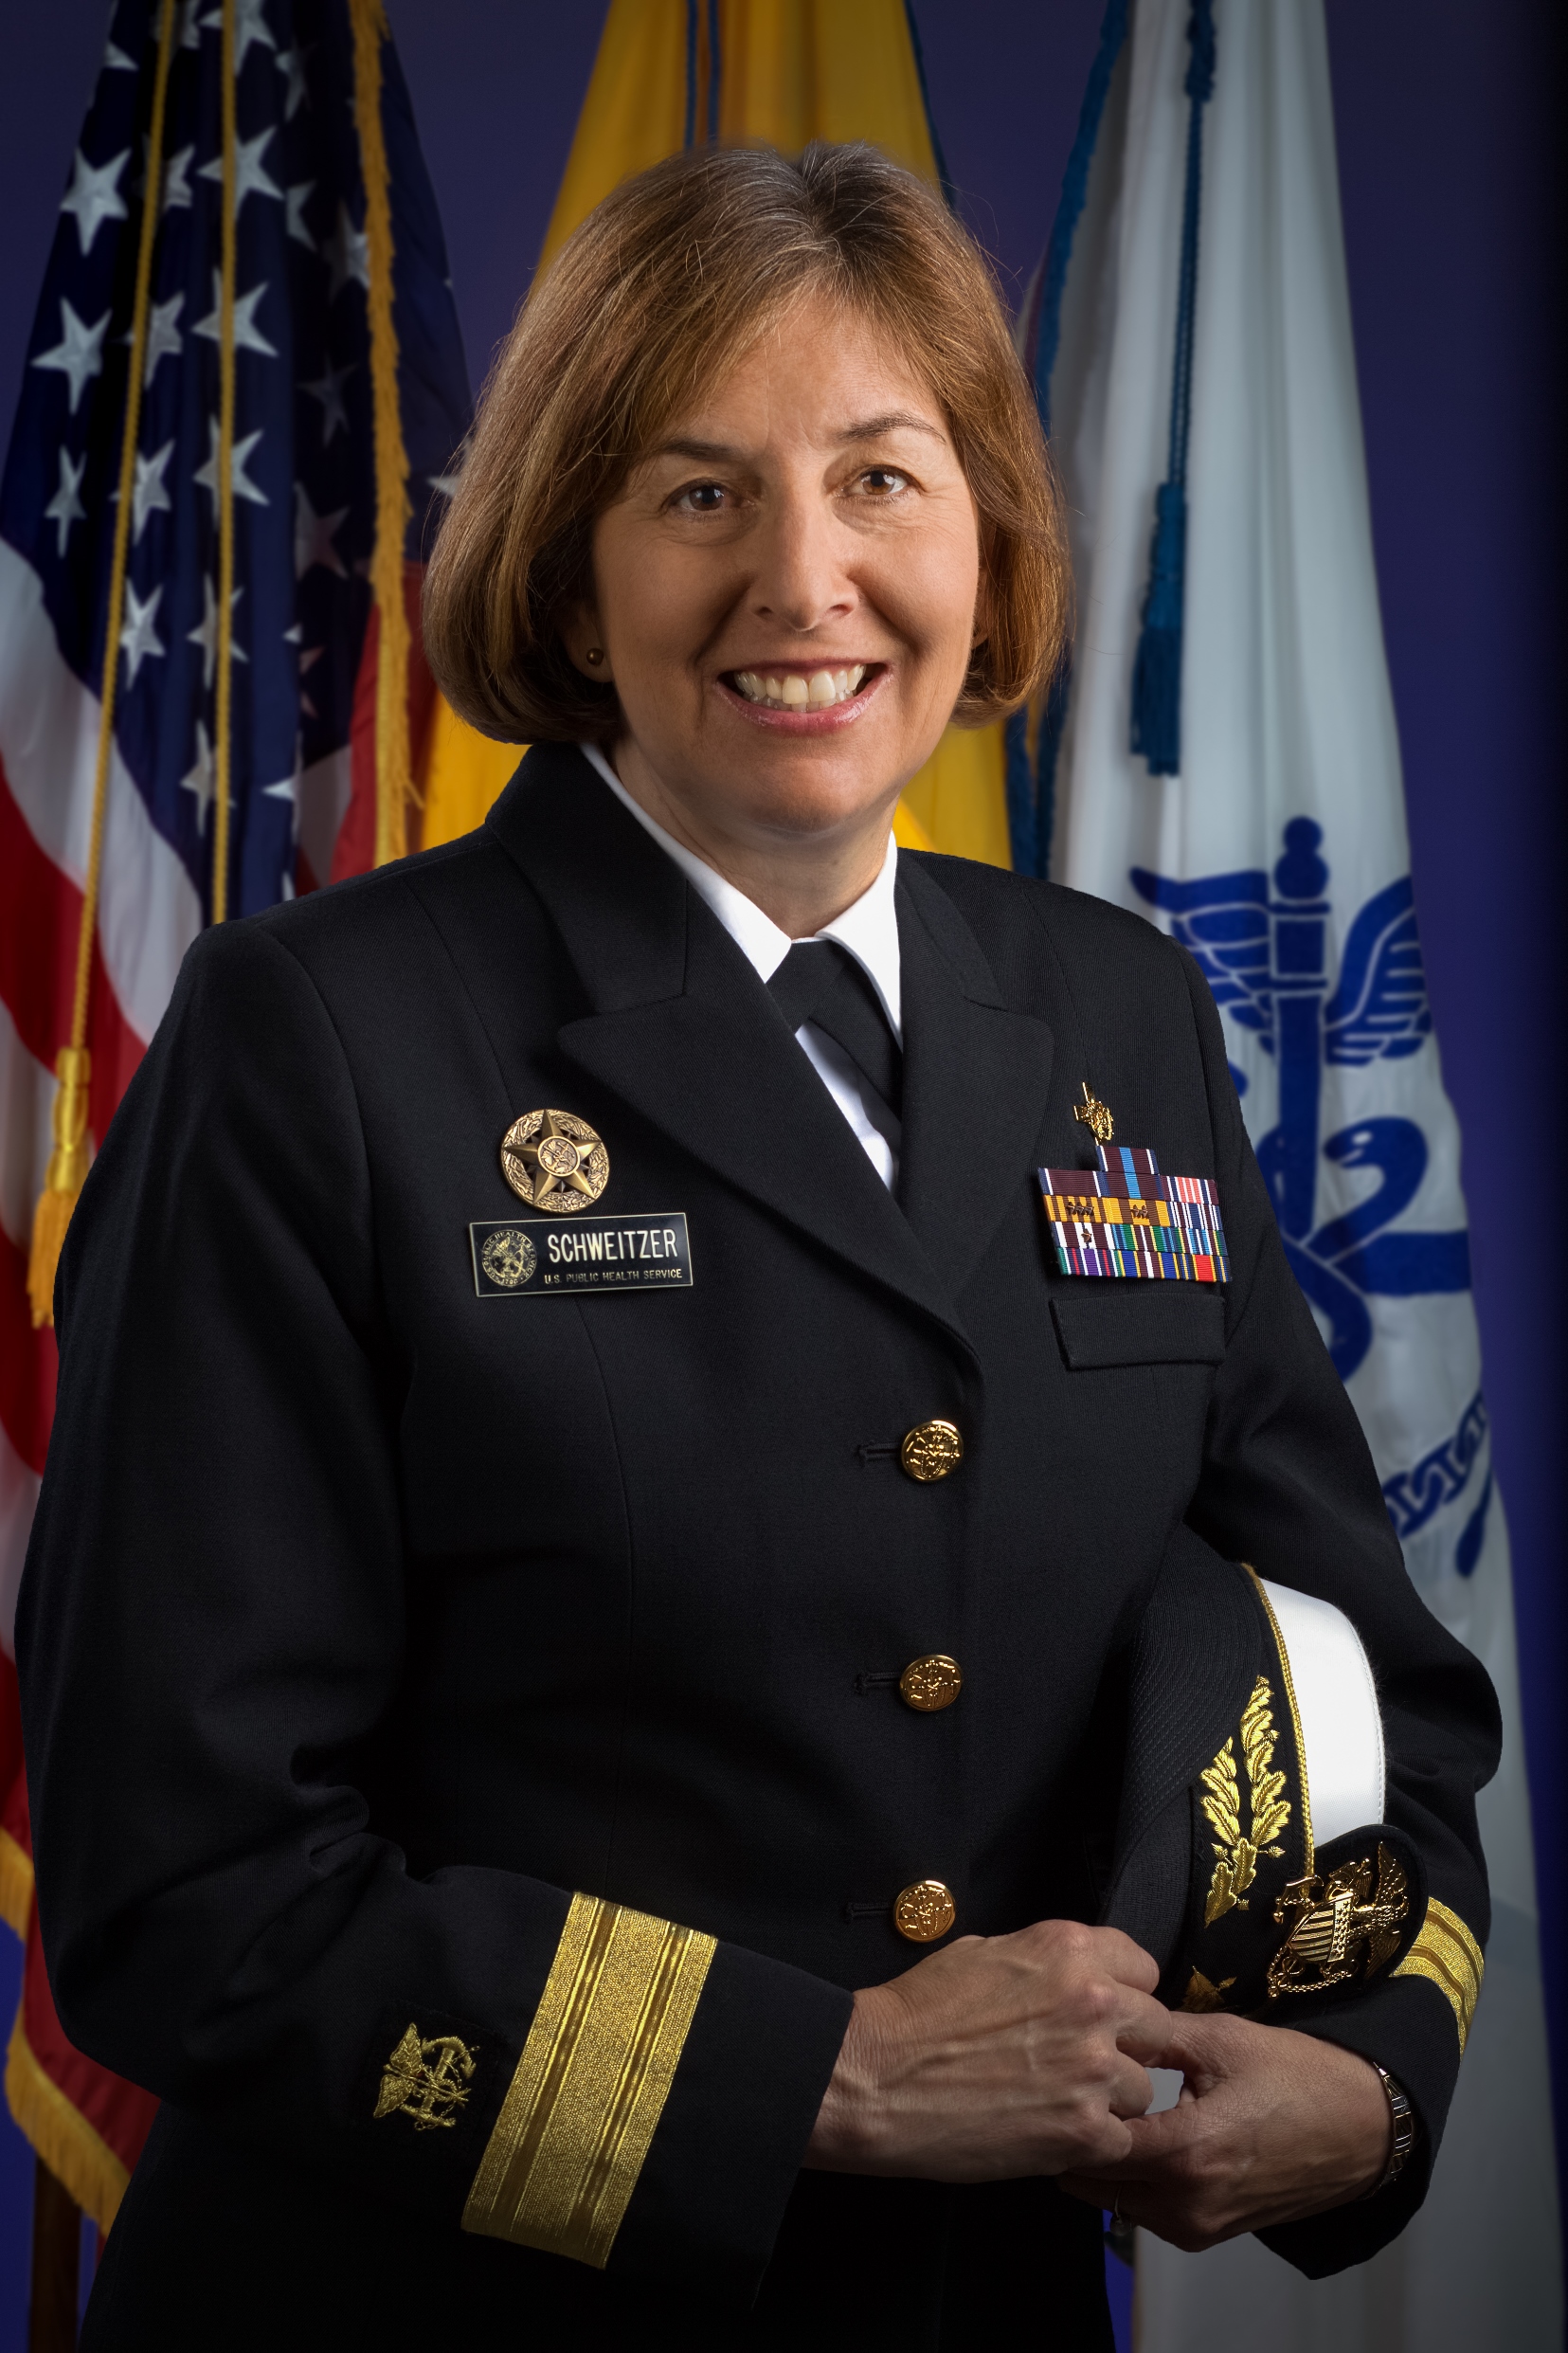 Assistant Surgeon General and Rear Admiral Pamela Schweitzer, Pharm.D., BCACP, is with the United States Public Health Service.